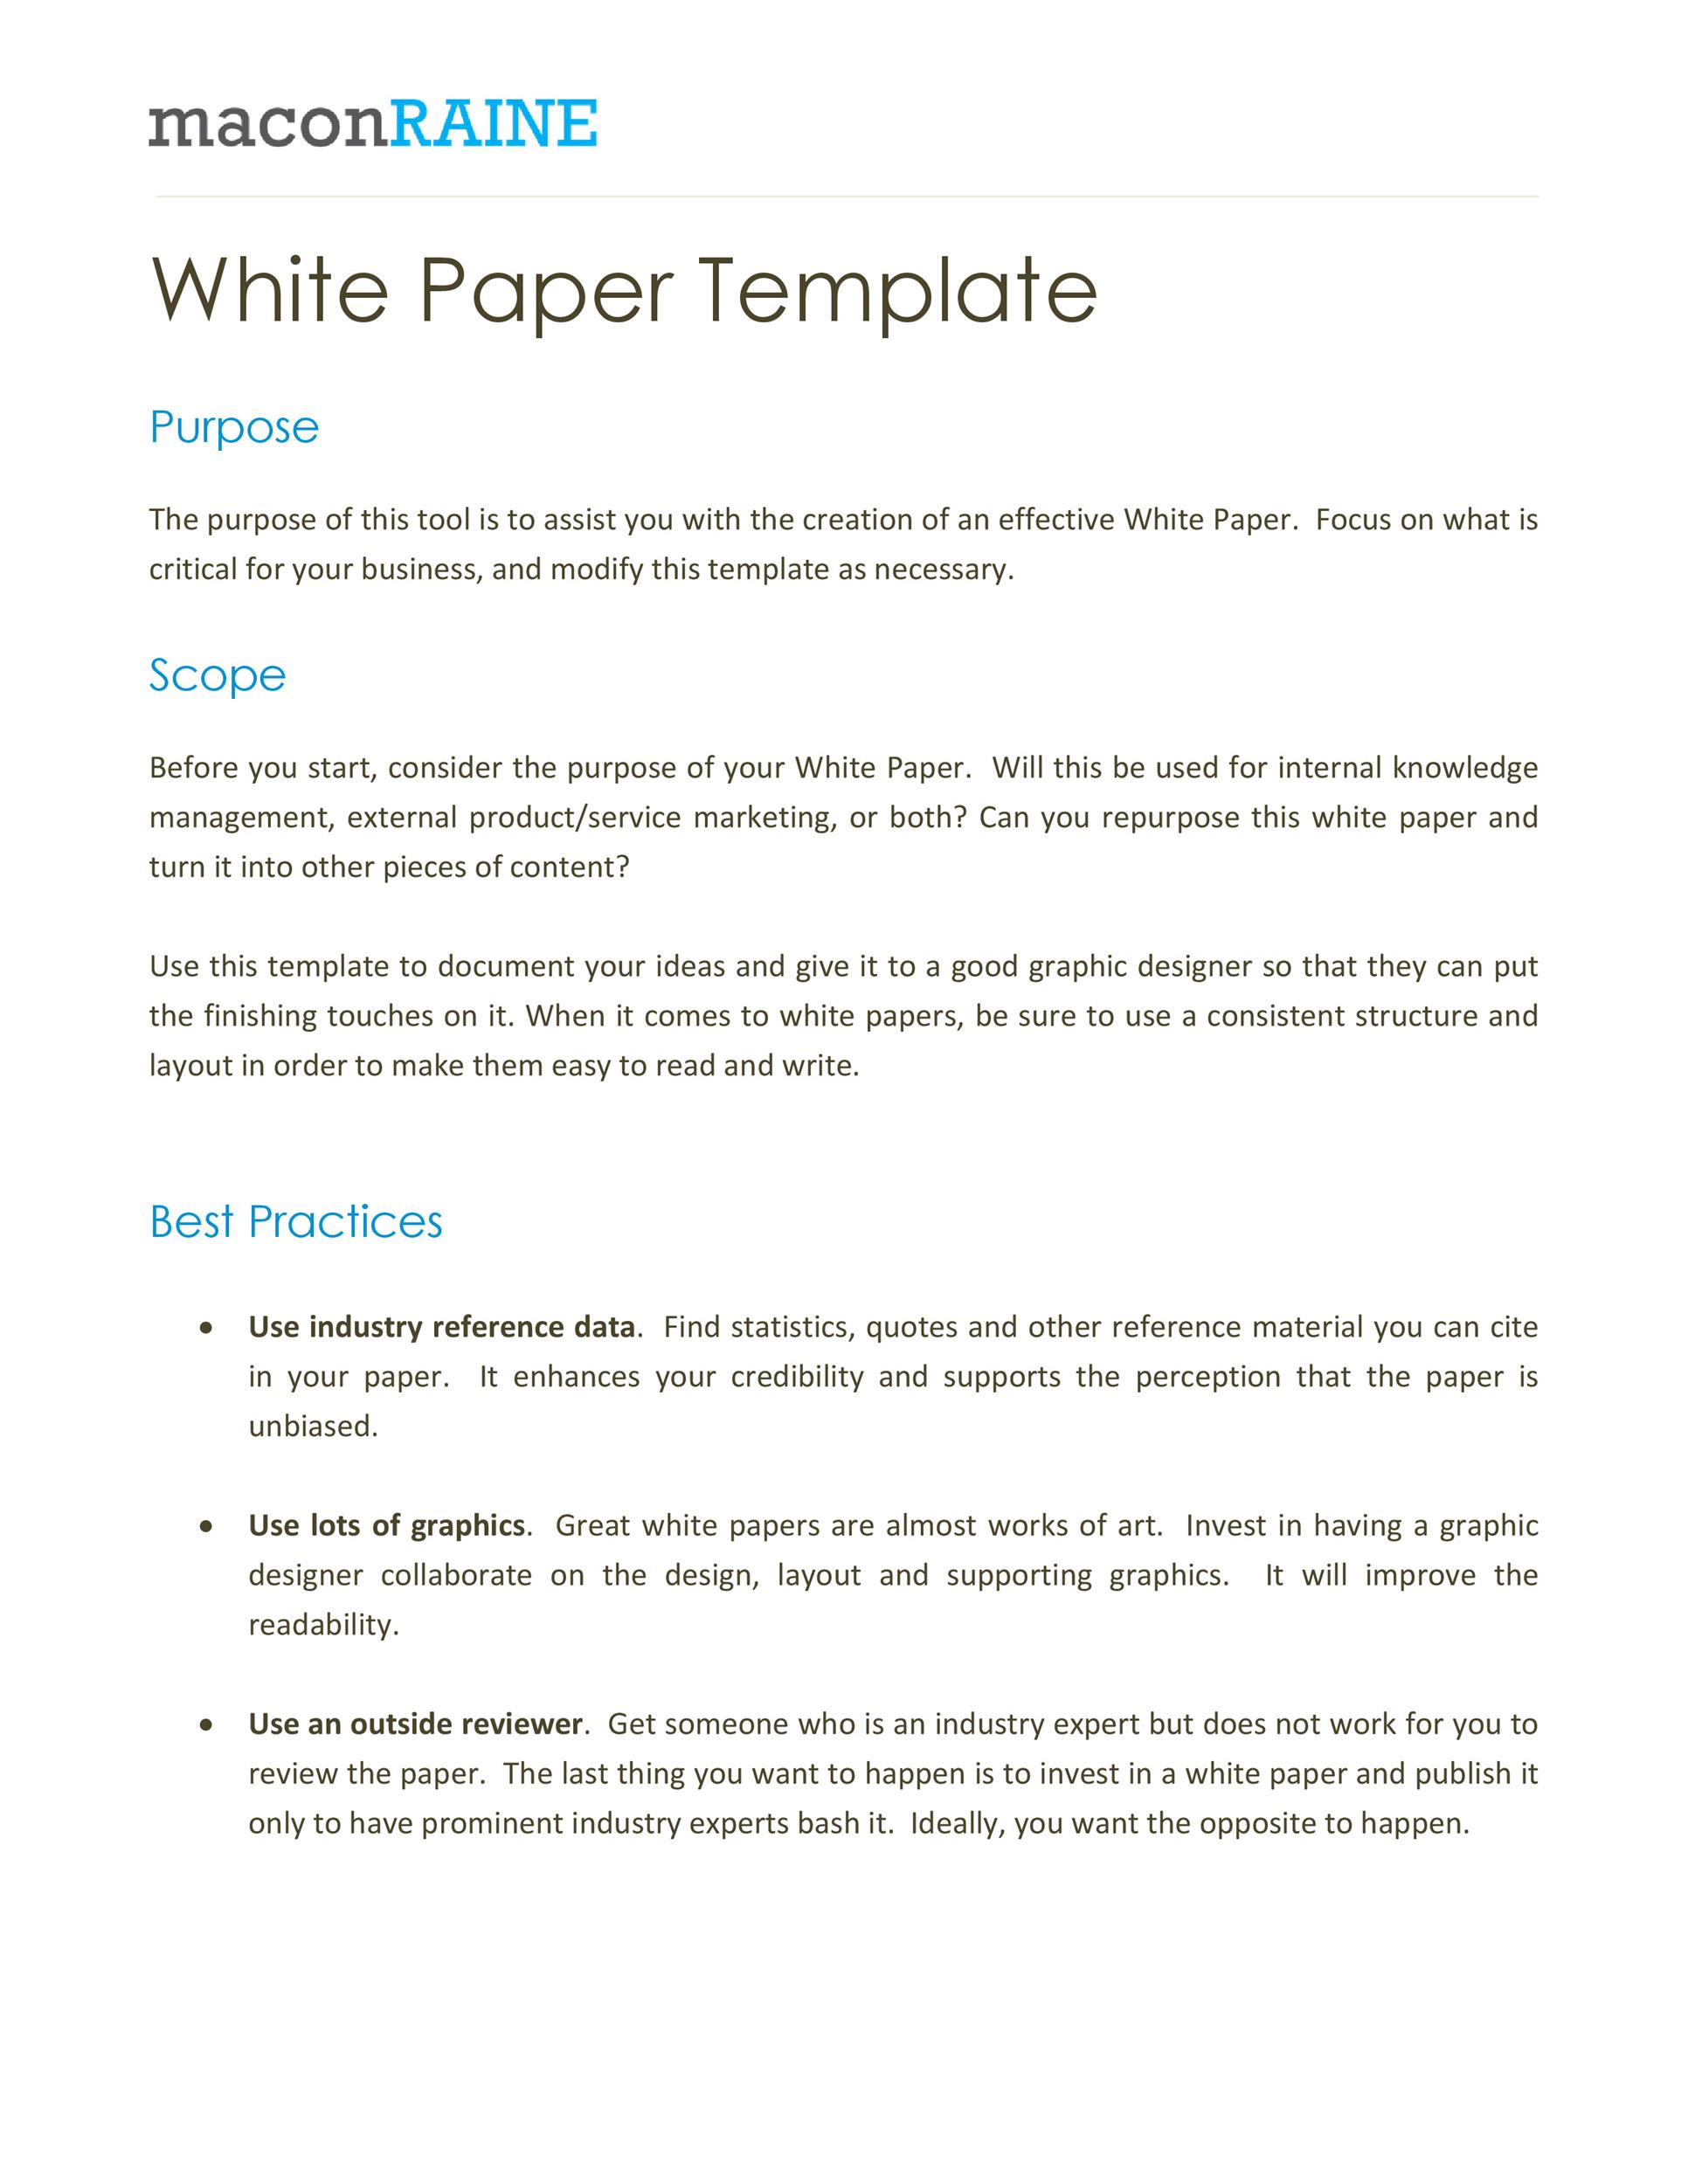 White Paper Example Format - Atomussekkai.blogspot.com Intended For White Paper Report Template